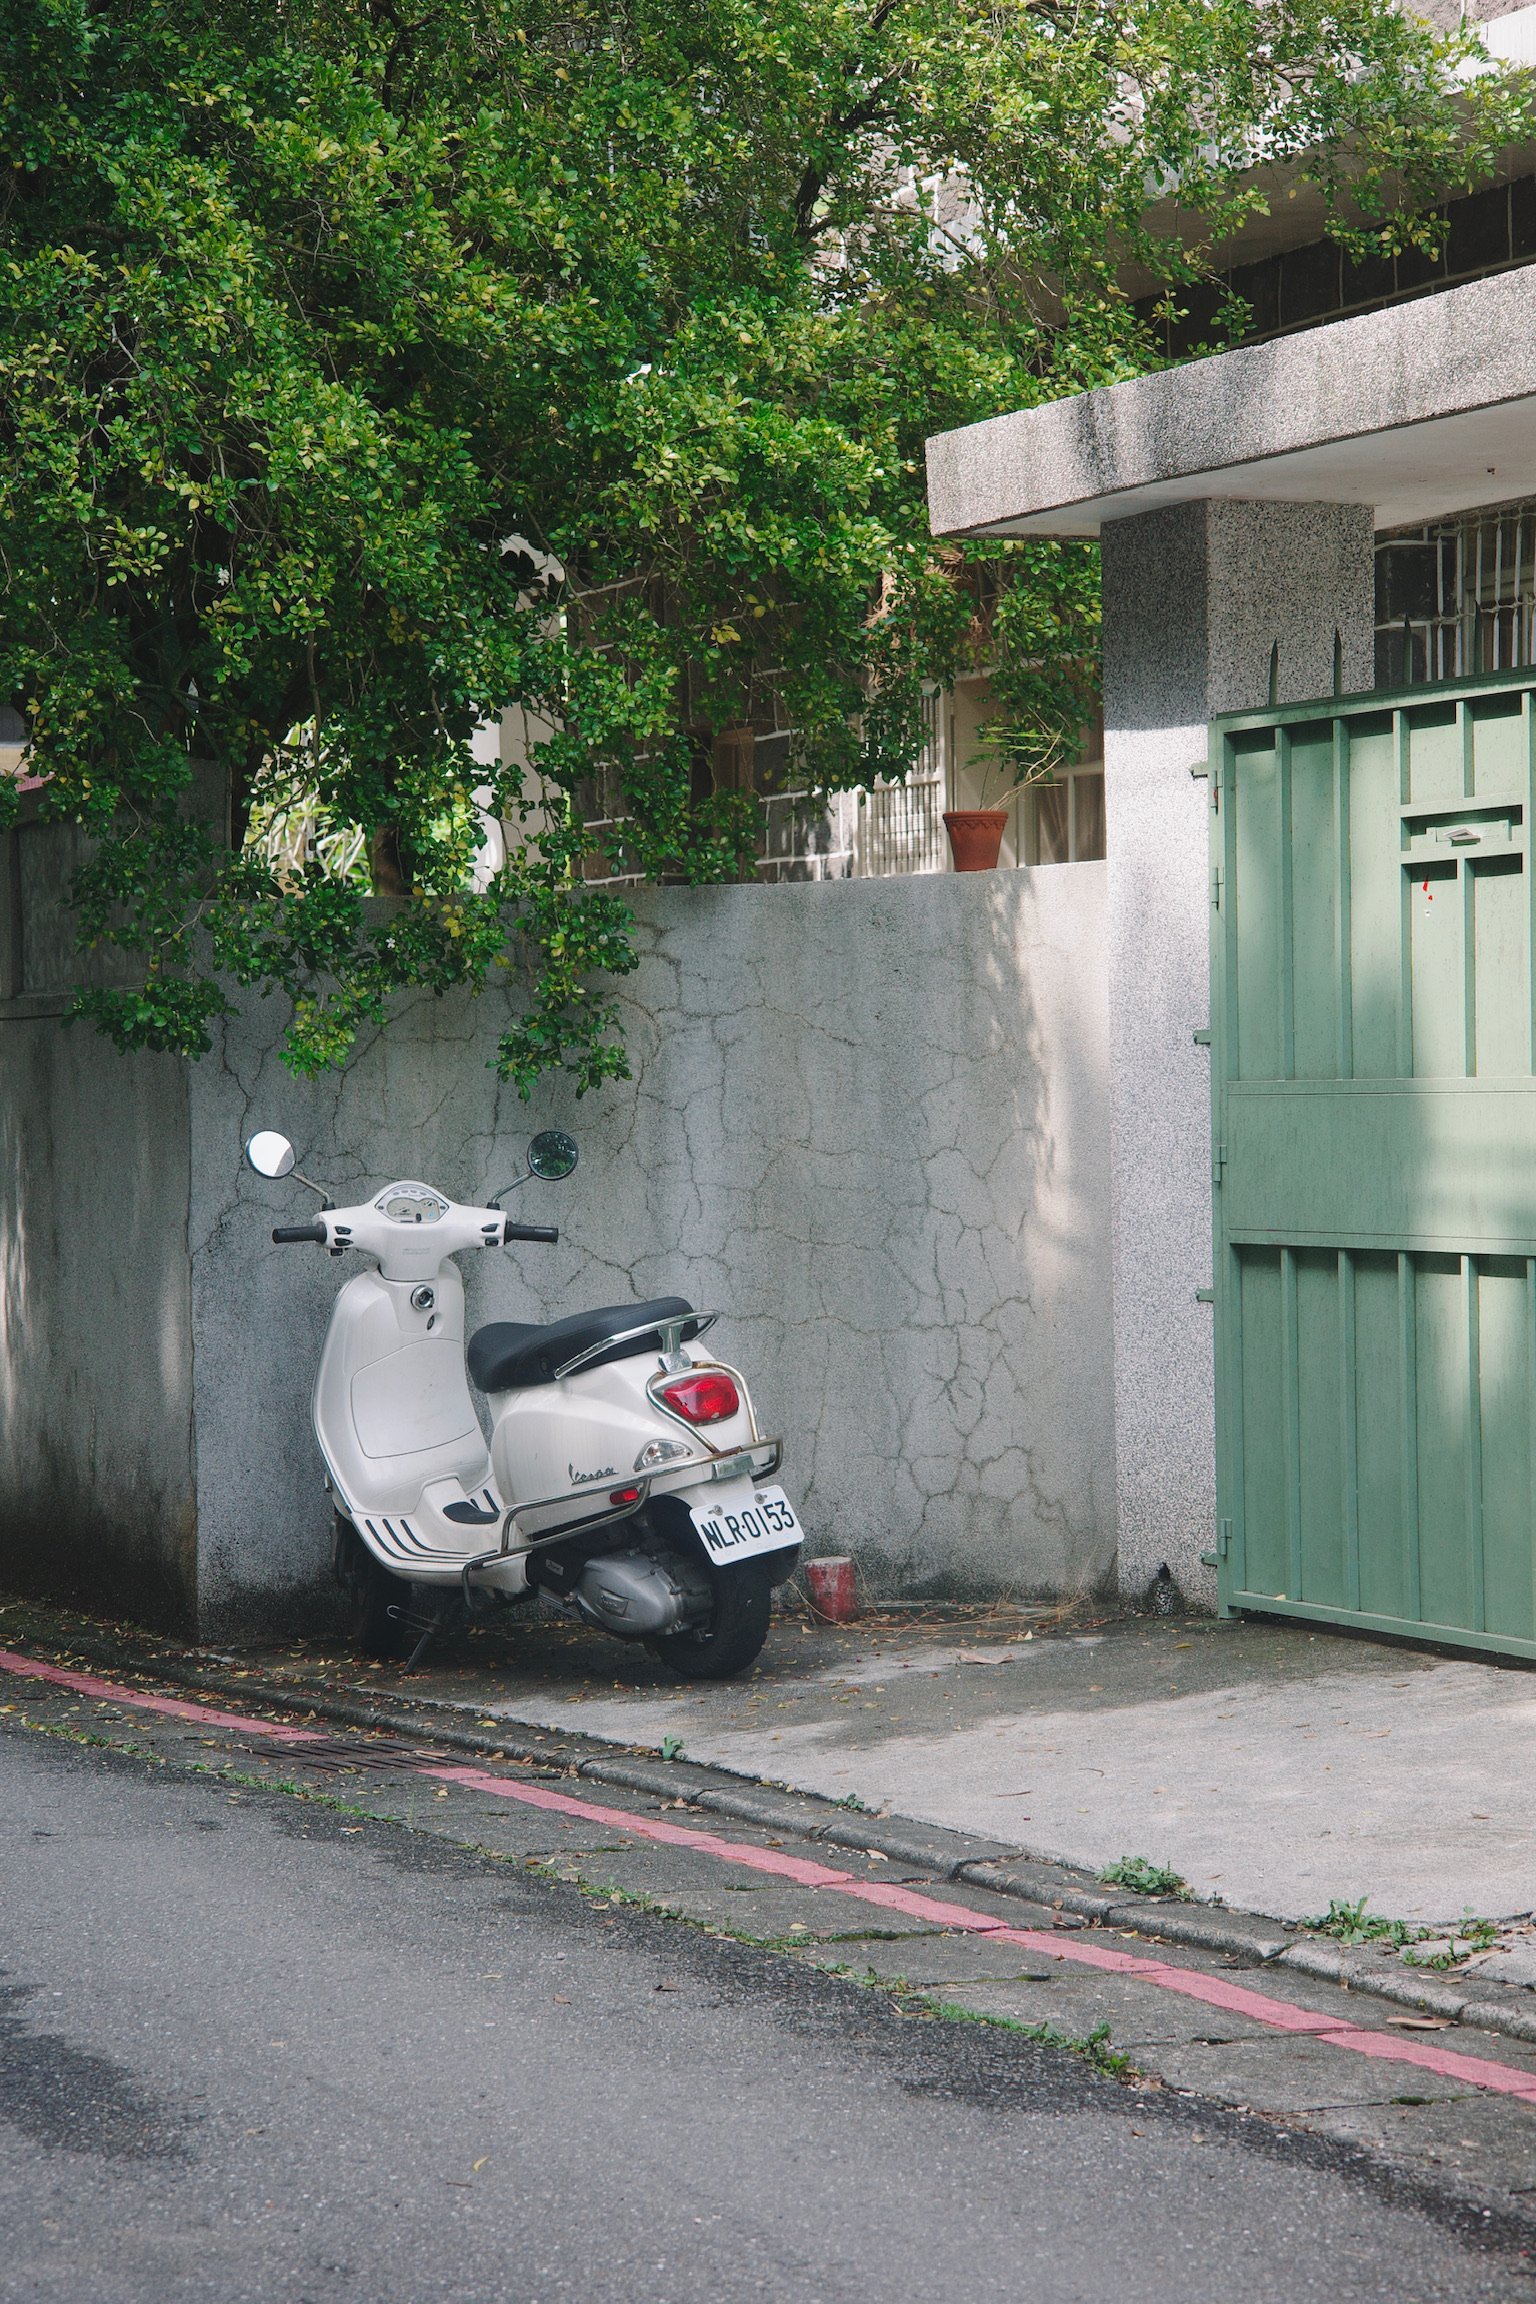 A white scooter parked in front of a house with a light green door and a big tree on a sunny day.